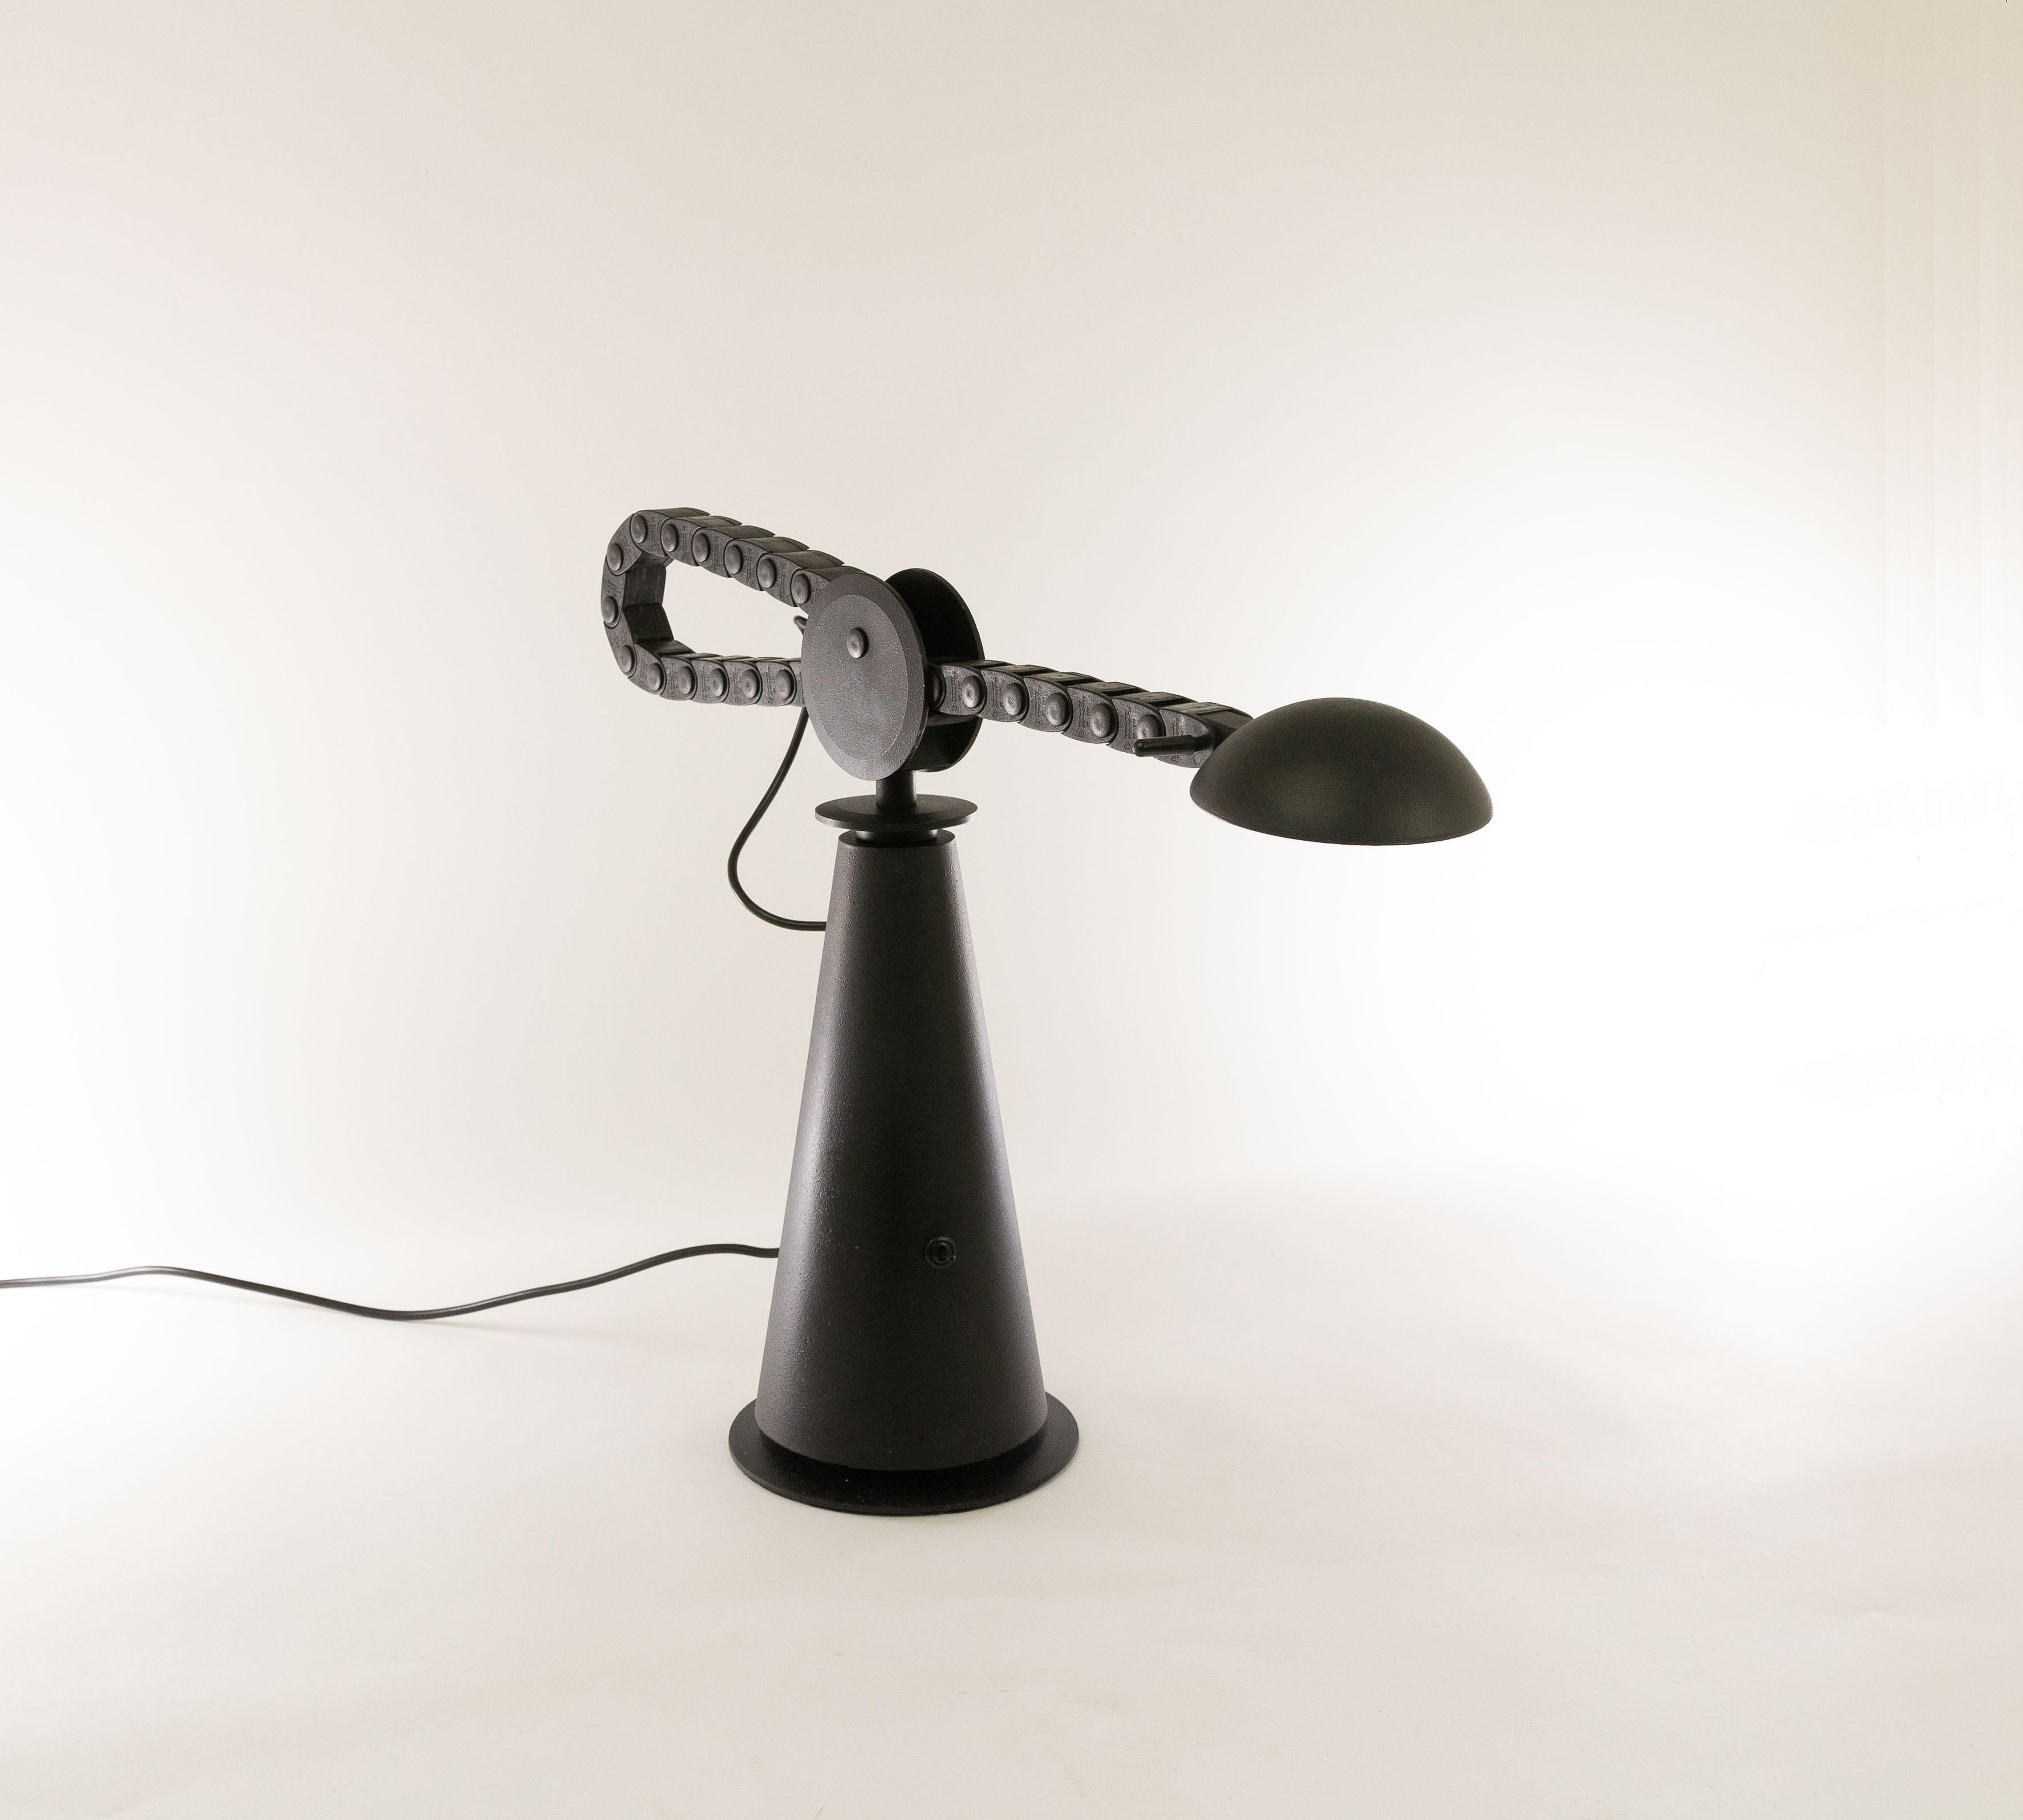 Gaucho halogen table lamp designed by Studio PER and manufactured by Egoluce in 1982.

The relatively heavy base is made of metal, just like the reflector and the 'wheel'. The adjustable arm which resembles a bicycle chain is made of